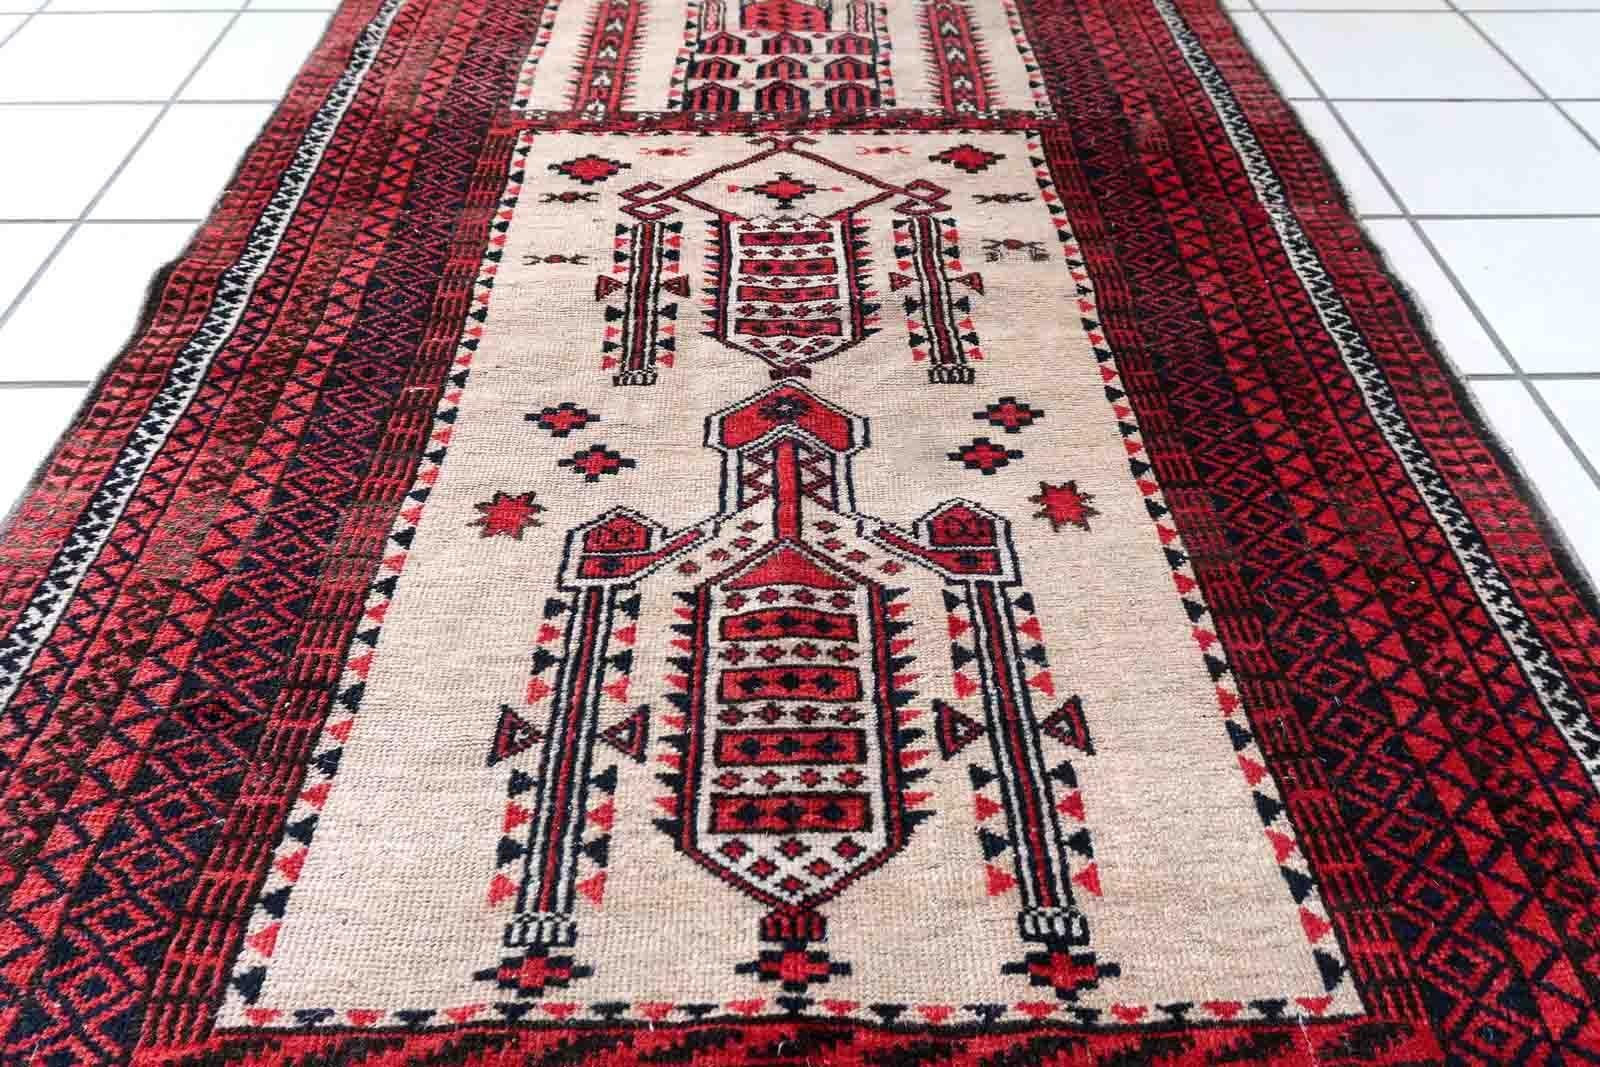 Handmade antique Afghan rug from Baluchi region. This prayer rug made in the beginning of 20th century, it is in original condition, has some low pile. 

-condition: original, some low pile,

-circa: 1910s,

-size: 2.8' x 4.2' (86cm x